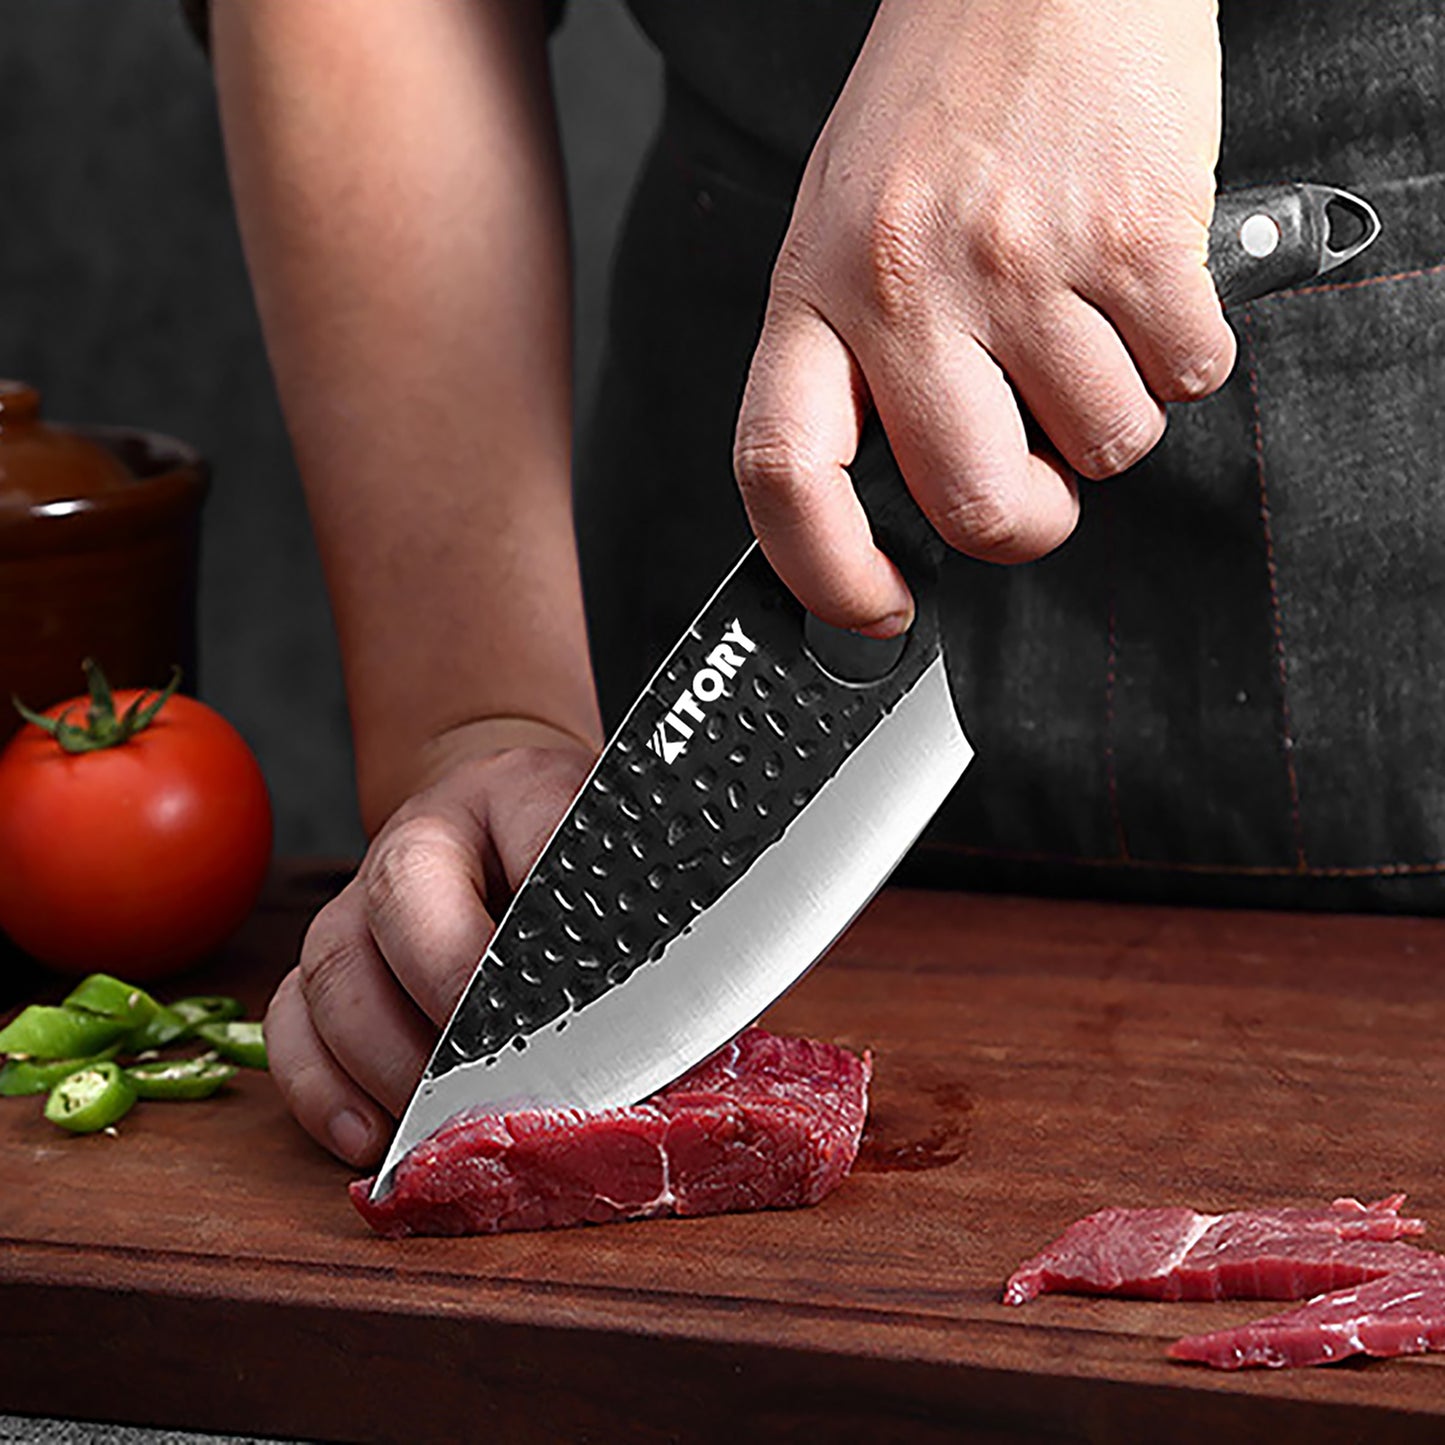 Kitory Forged Sharp Filet Knife with Non-Slip Handle